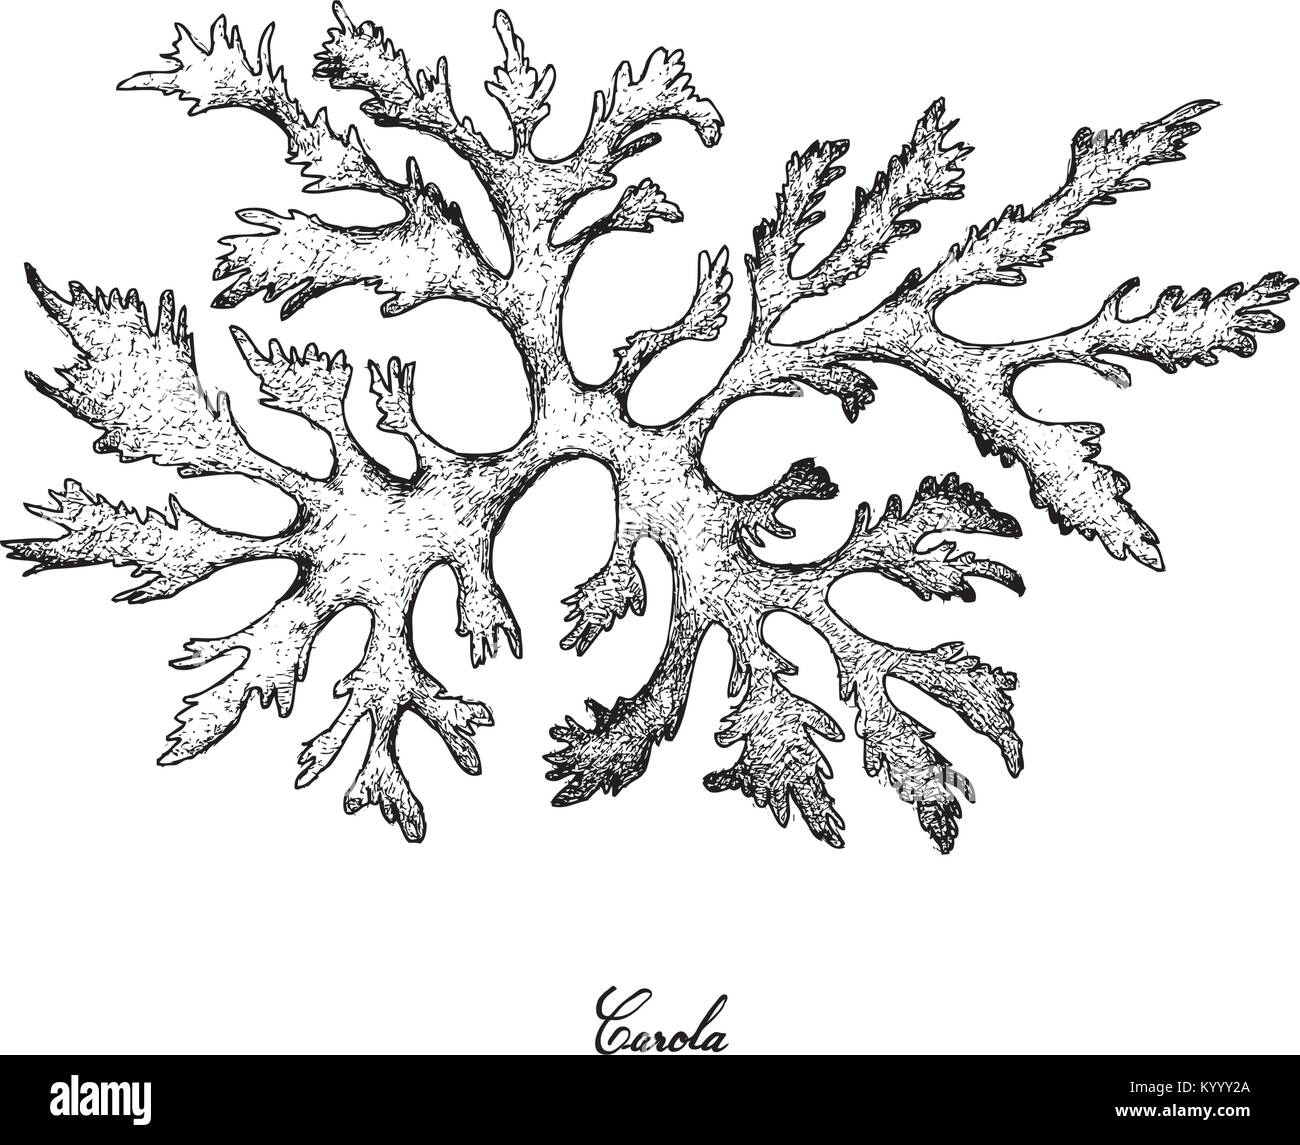 Sea Vegetables, Illustration of Hand Drawn Sketch Delicious Fresh Carola or Callophyllis Variegata Seaweed Isolated on White Background. Stock Vector